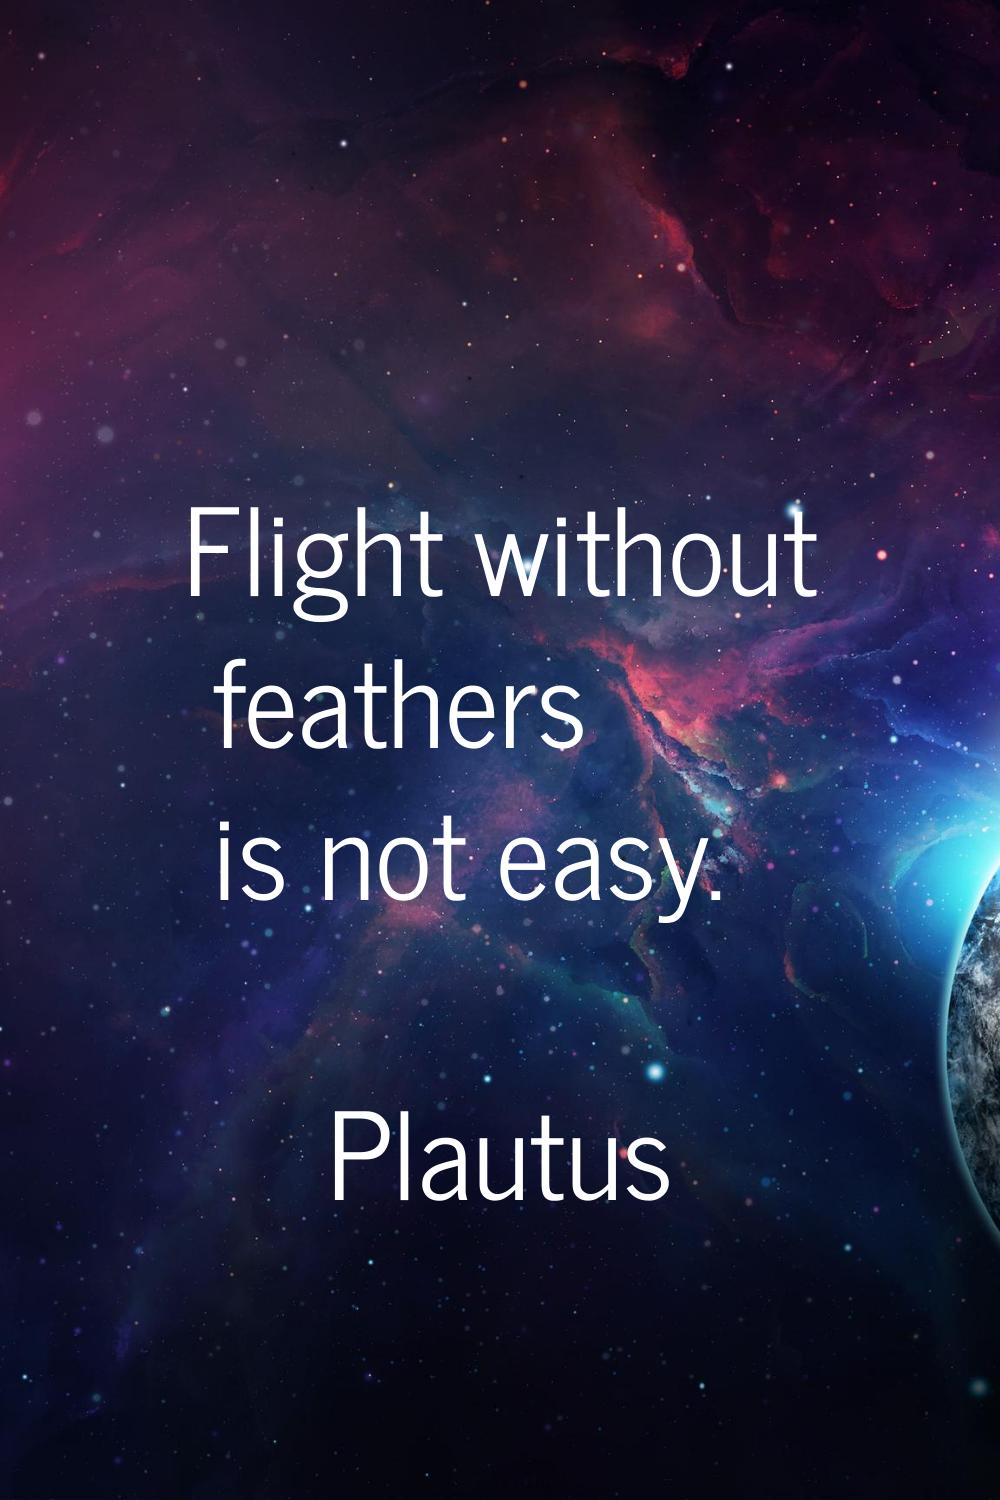 Flight without feathers is not easy.